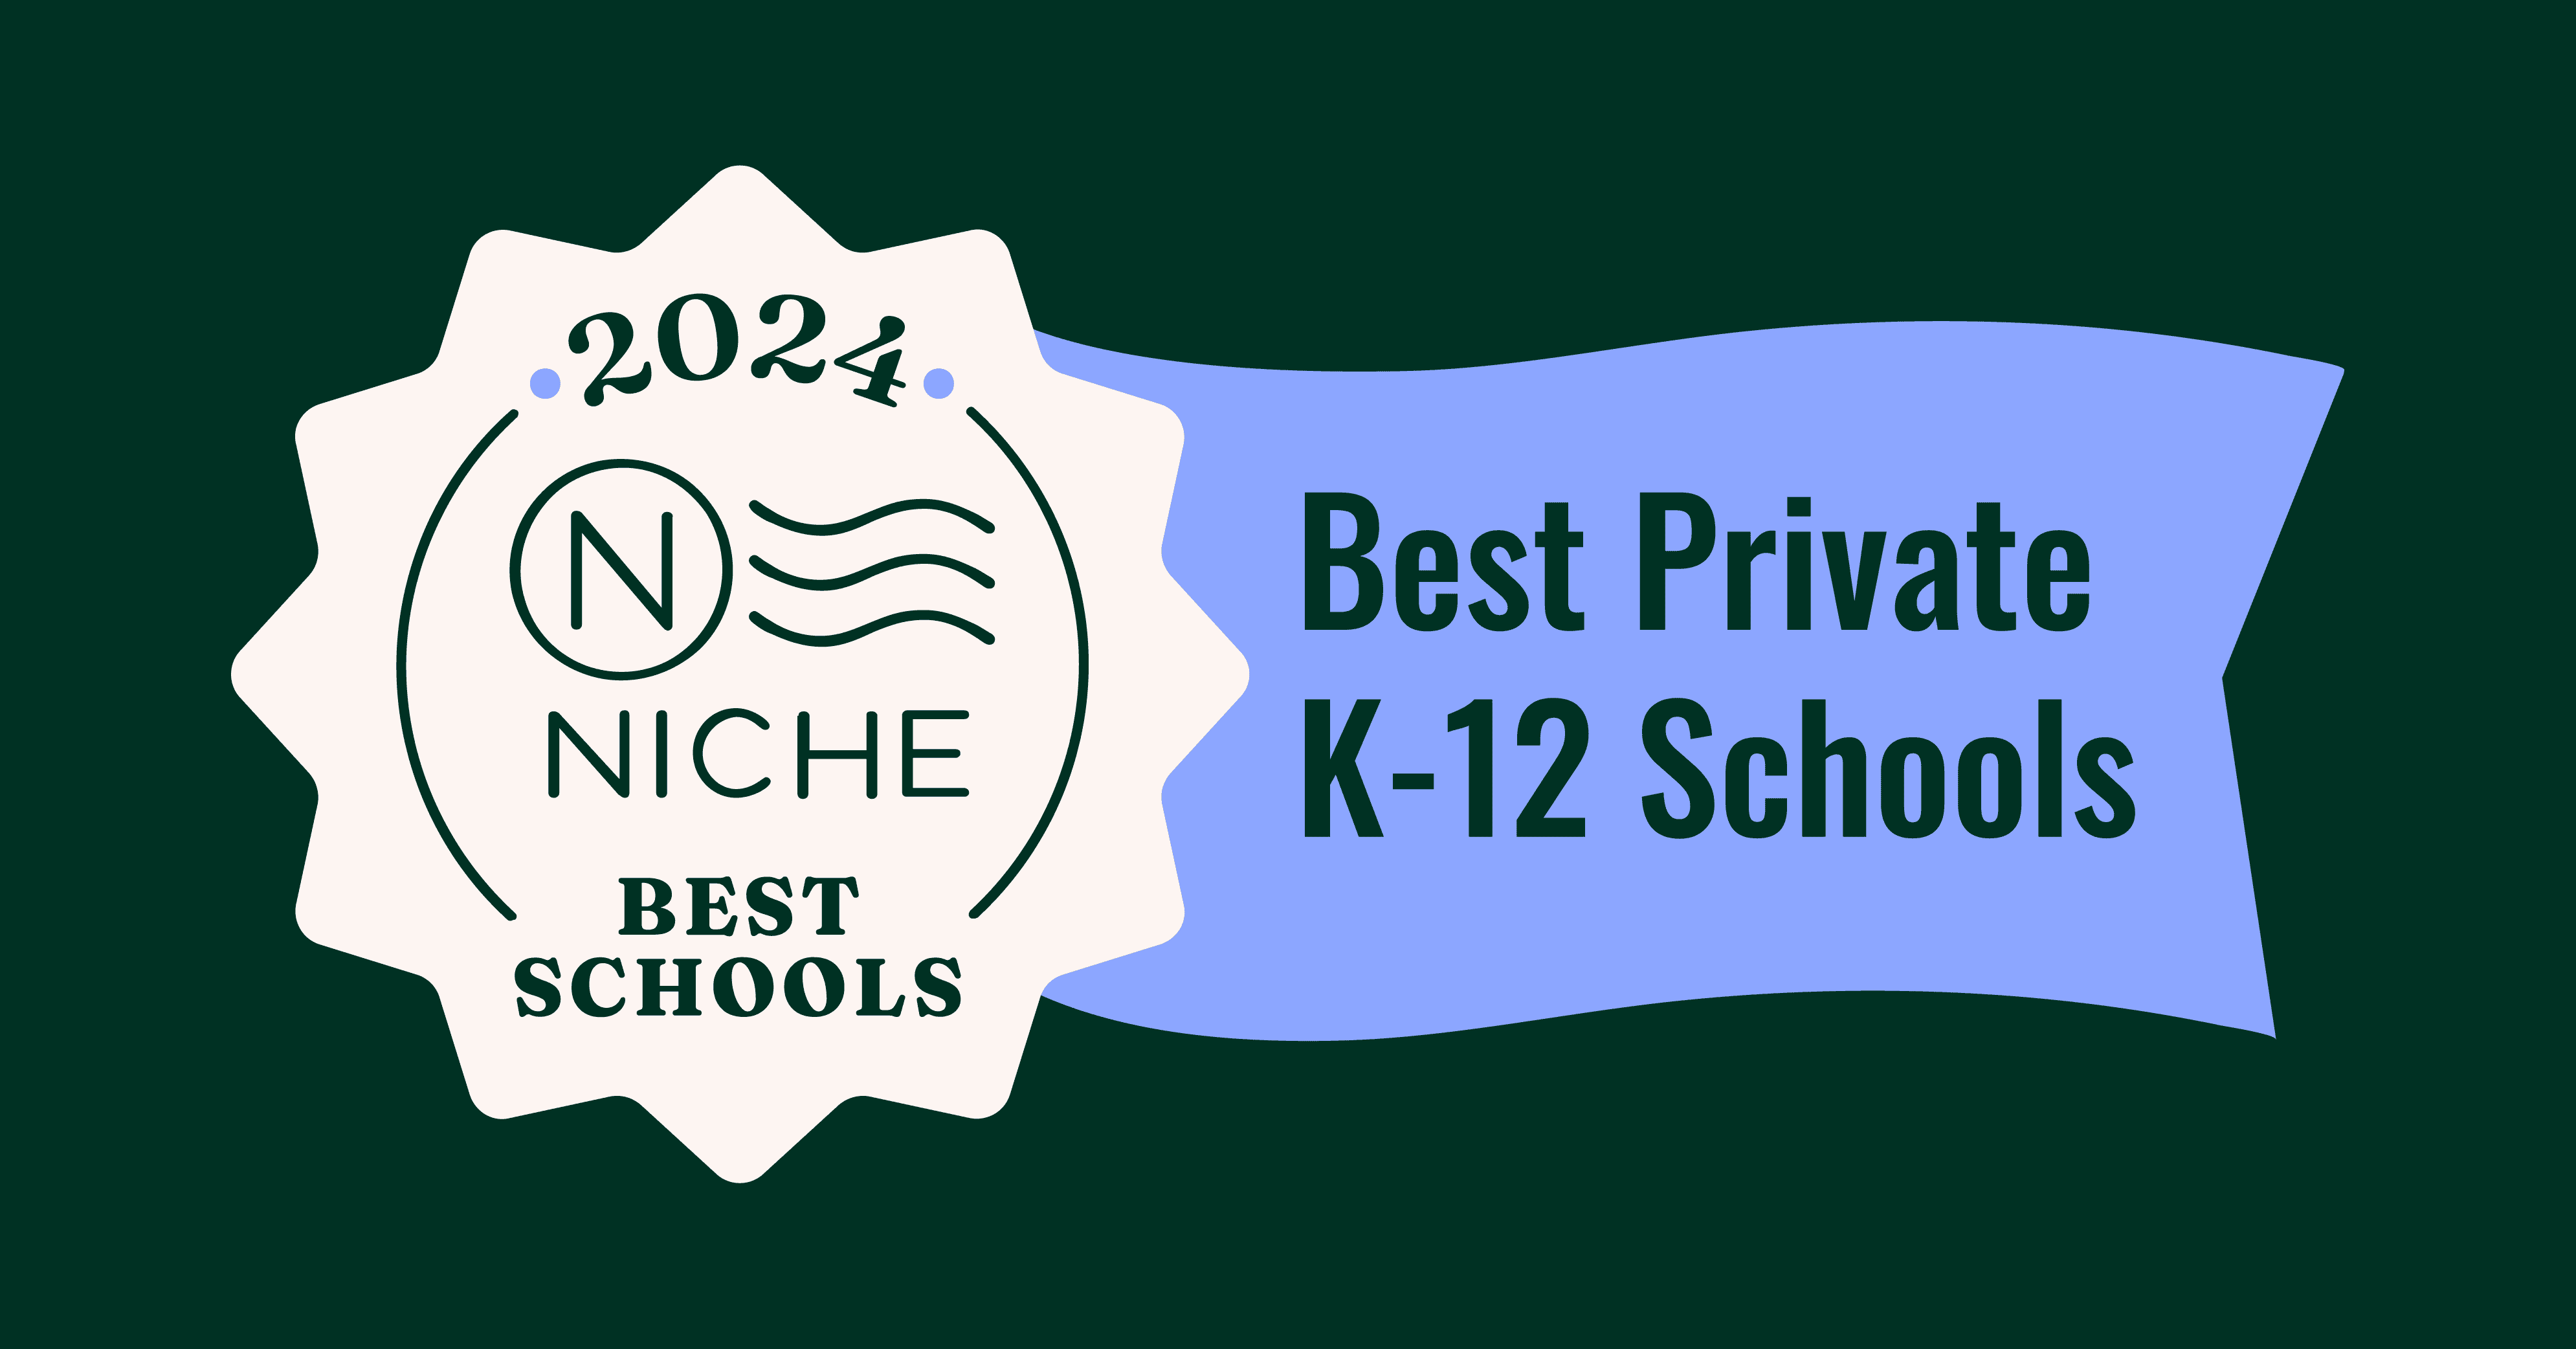 University School of the Lowcountry is a proud 2024 NICHE Best Private K-12 School honoree.